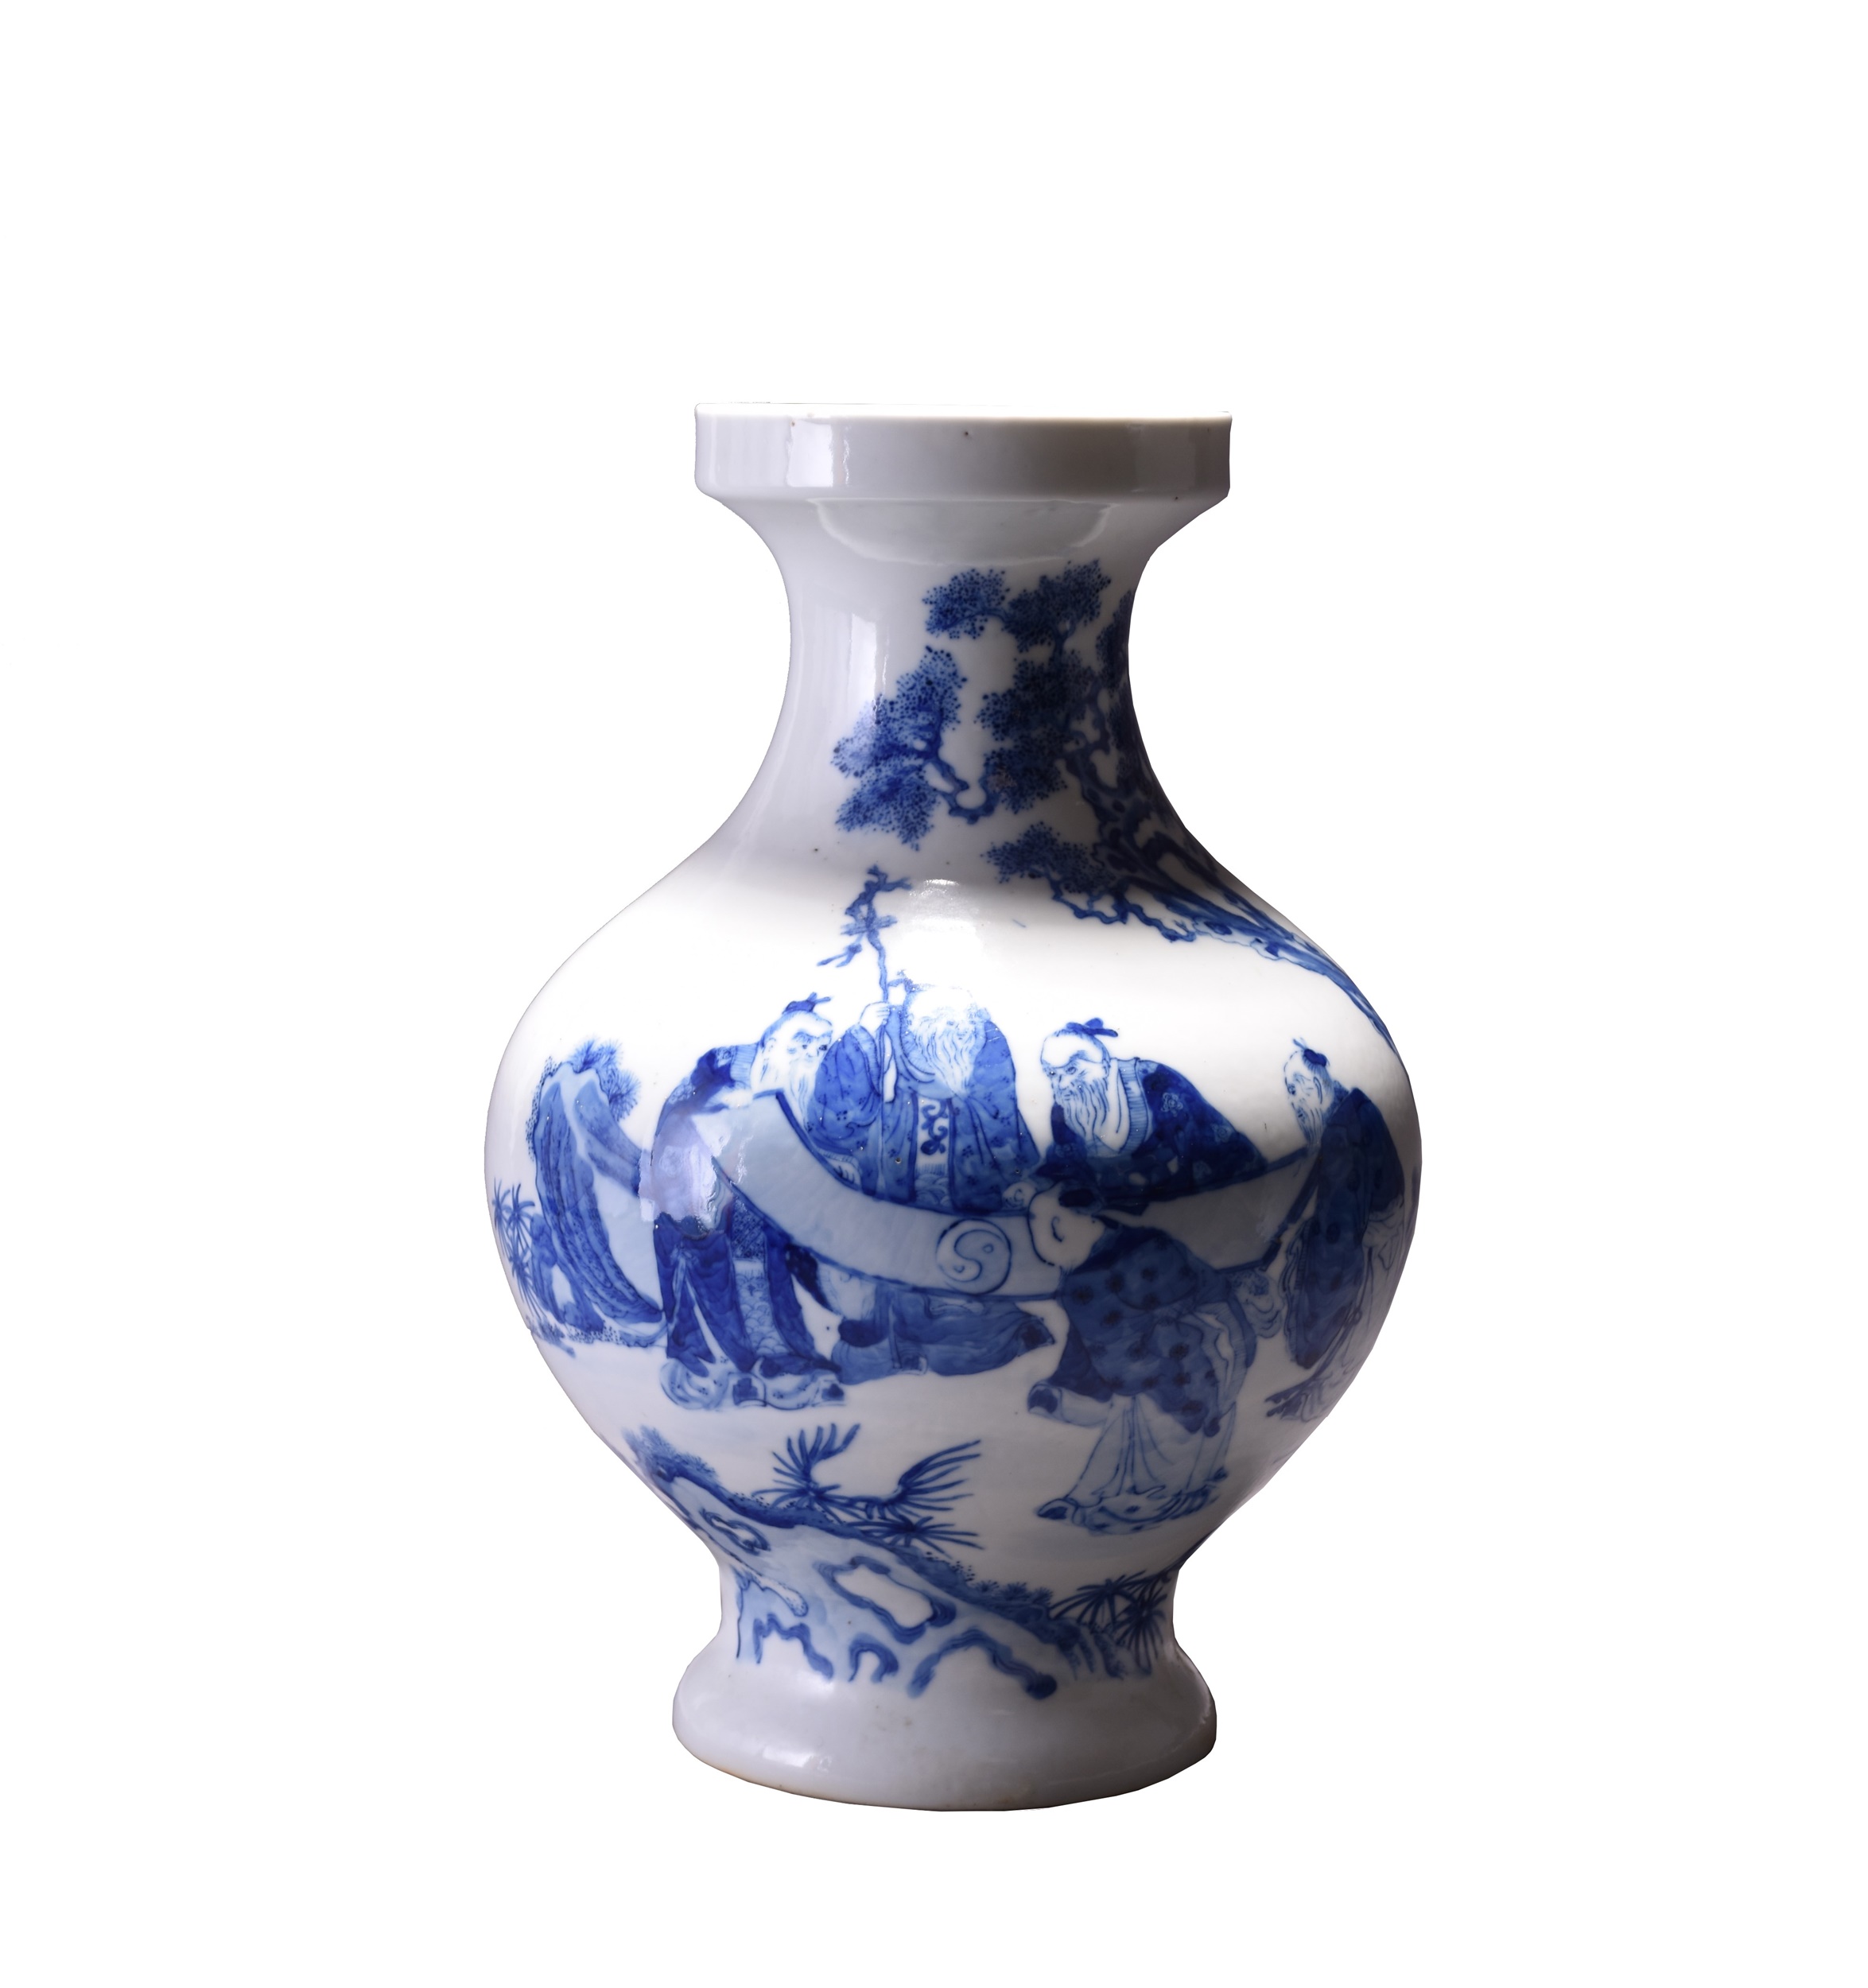 A beautiful Qianlong mark and period blue and white vase decorated with scholars. Estimate: £1,000-1,500